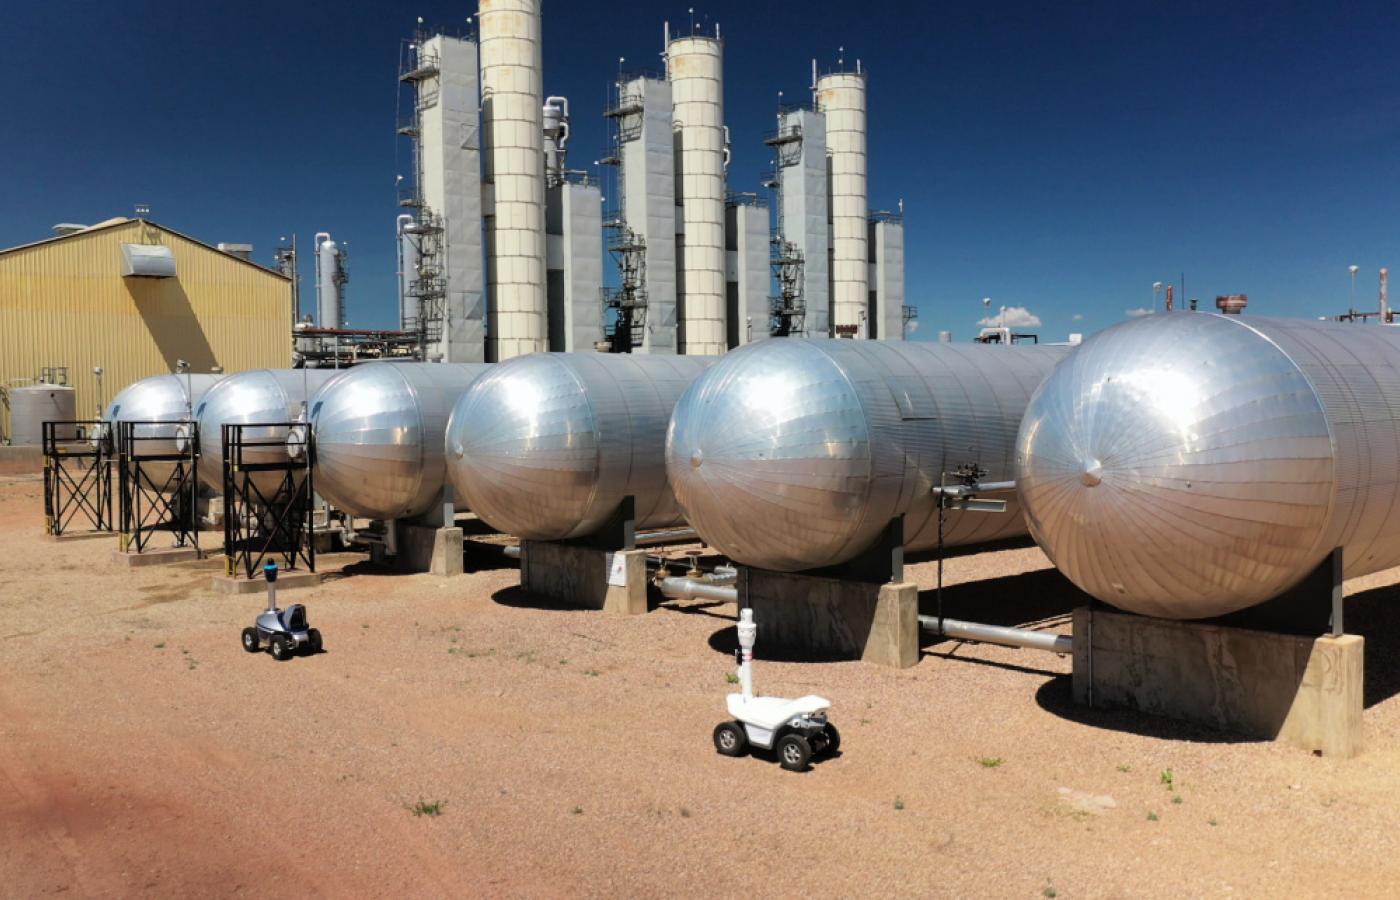 Inspection Robots Invade Oil and Gas Space